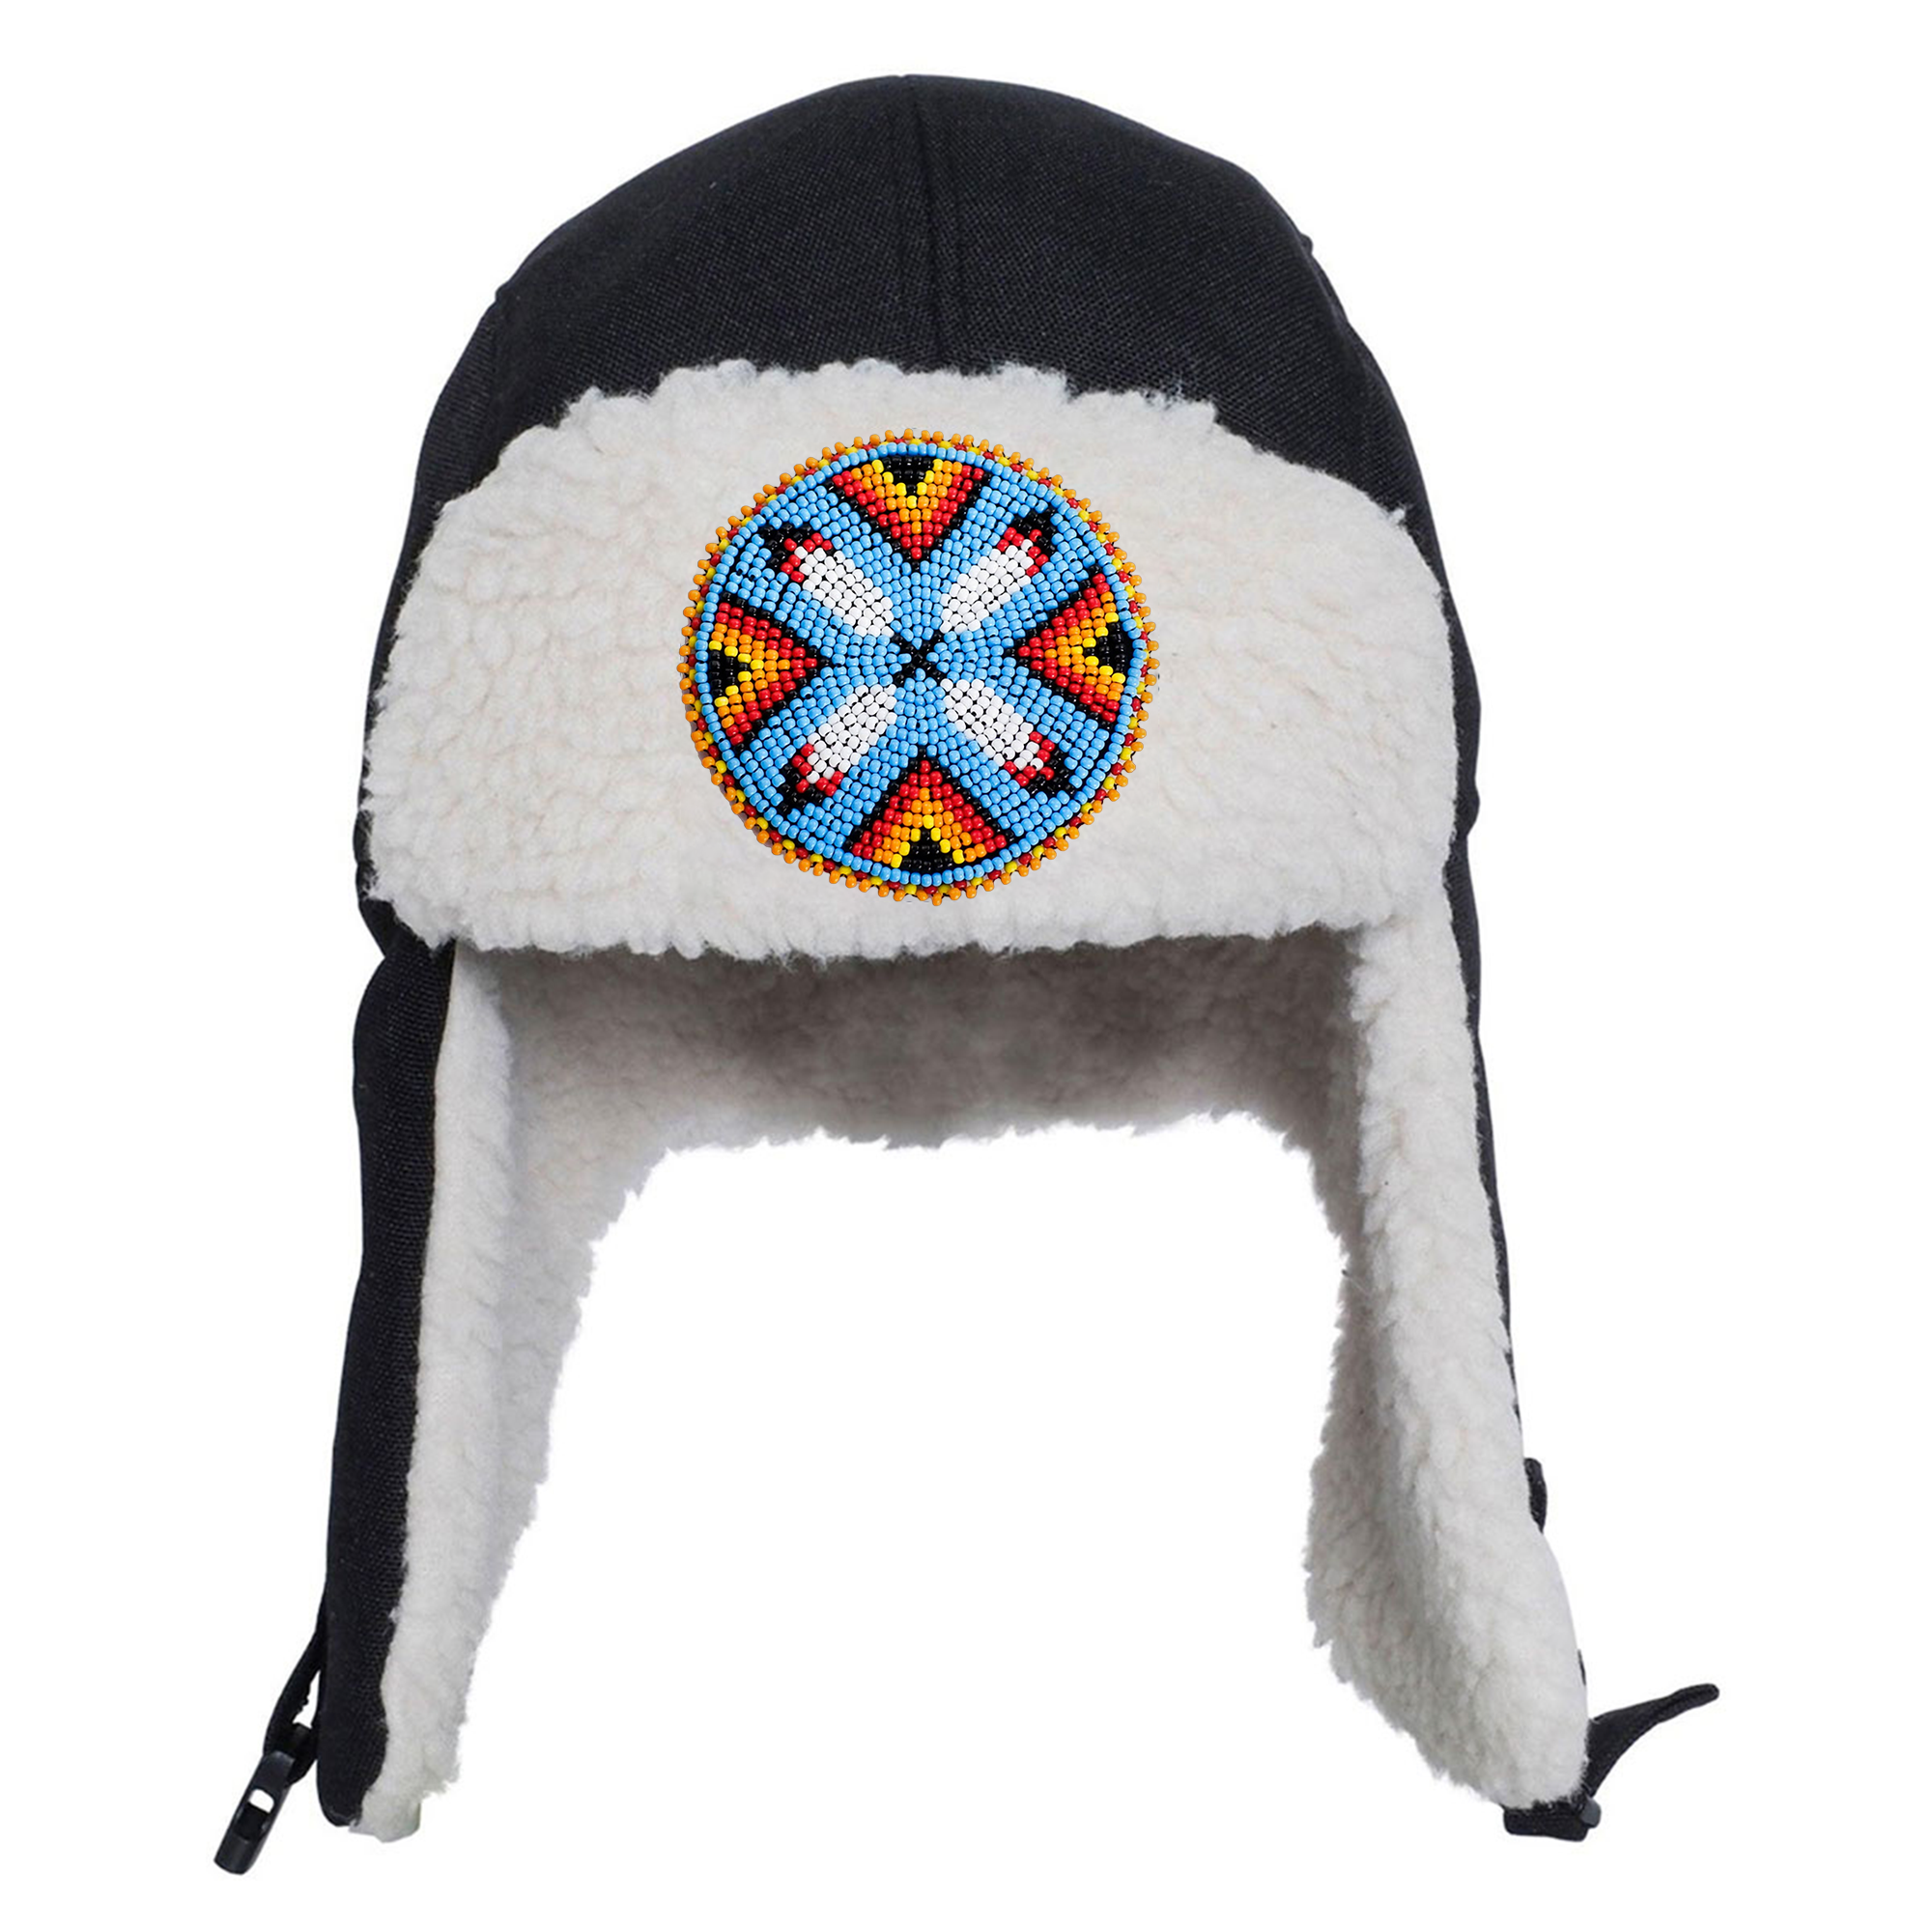 SALE 50% OFF - Four Feather Beaded Winter Trapper Hats for Men Women Native American Style